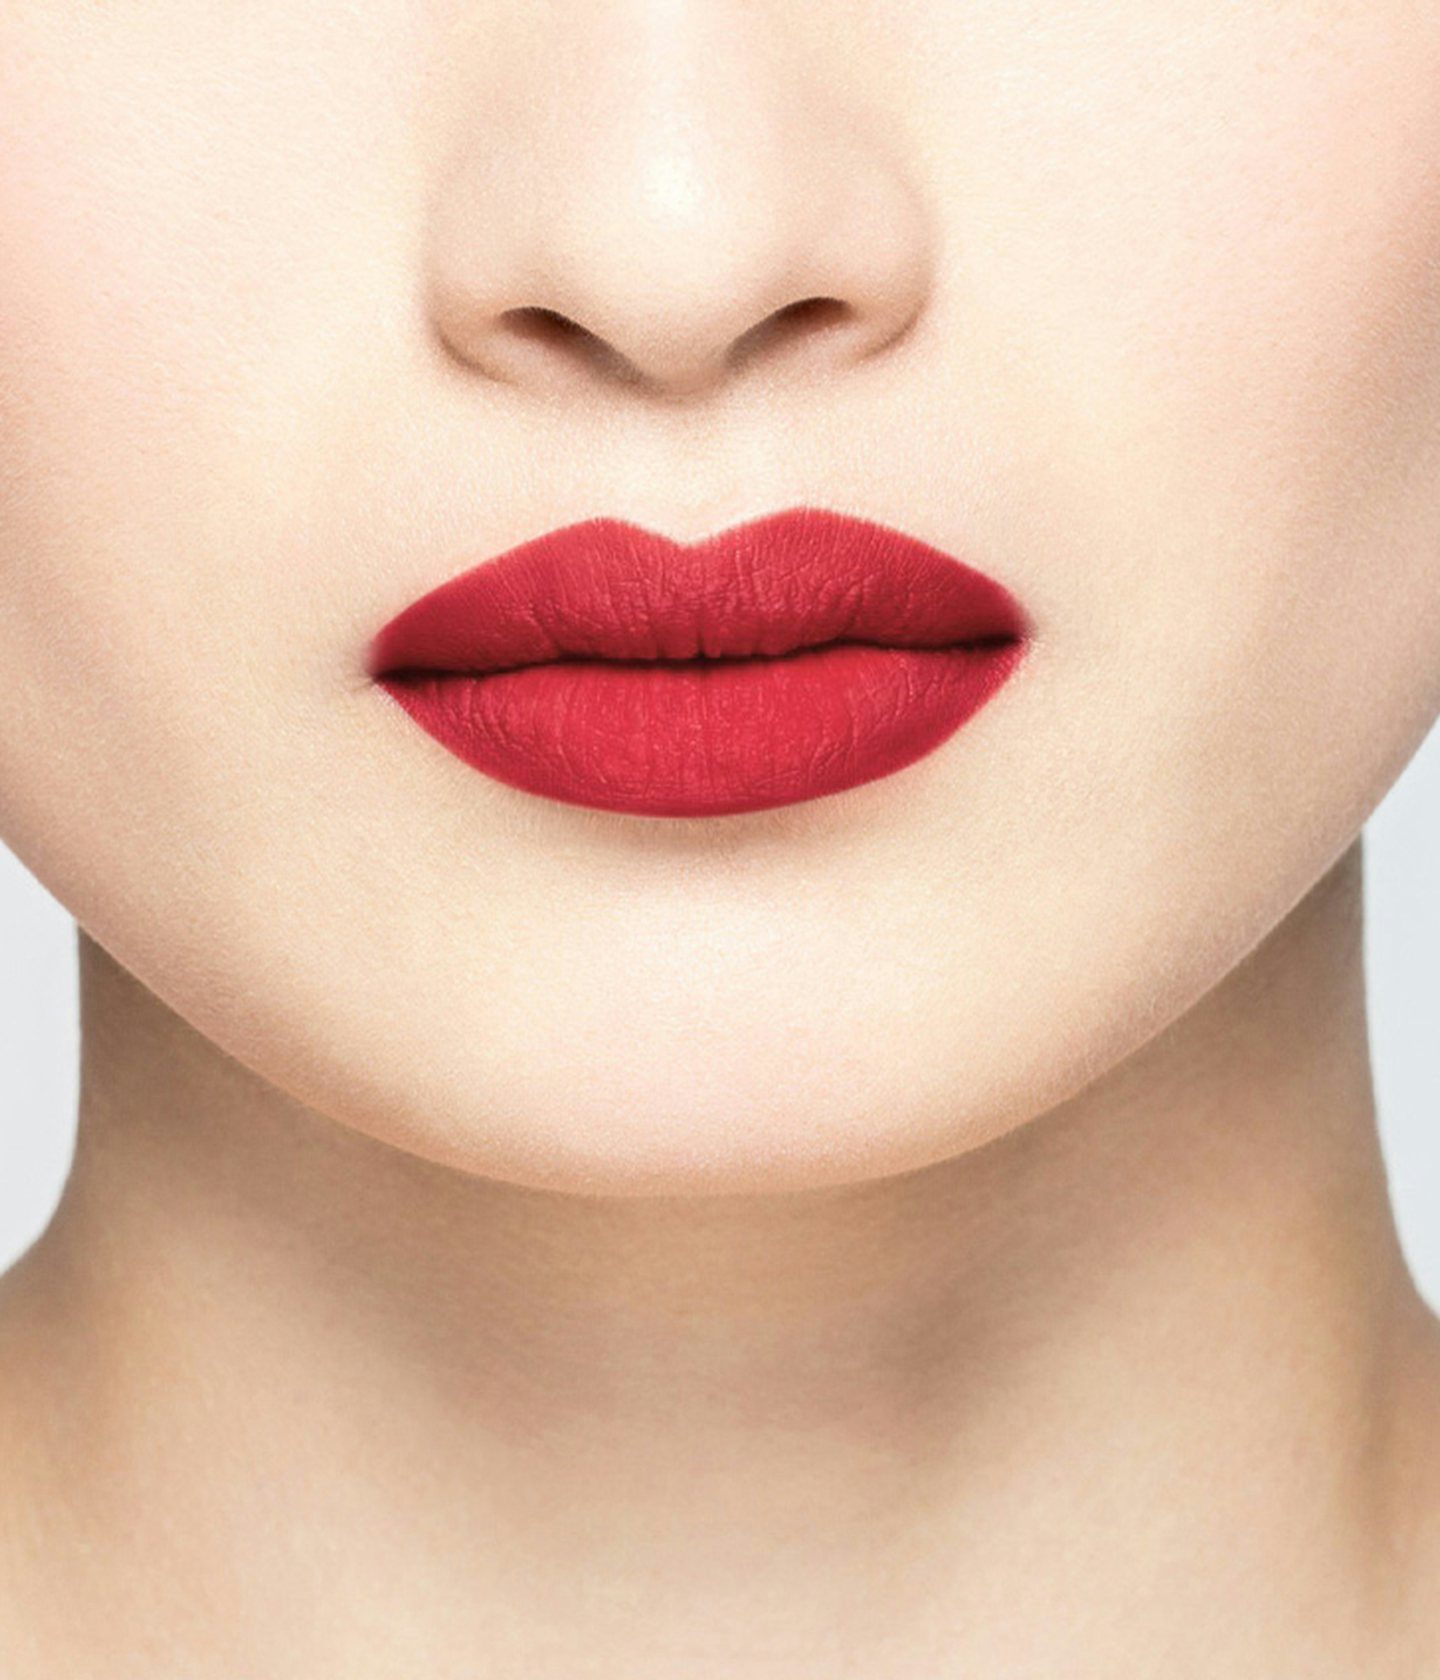 La bouche rouge Folie lipstick shade on the lips of an Asian model